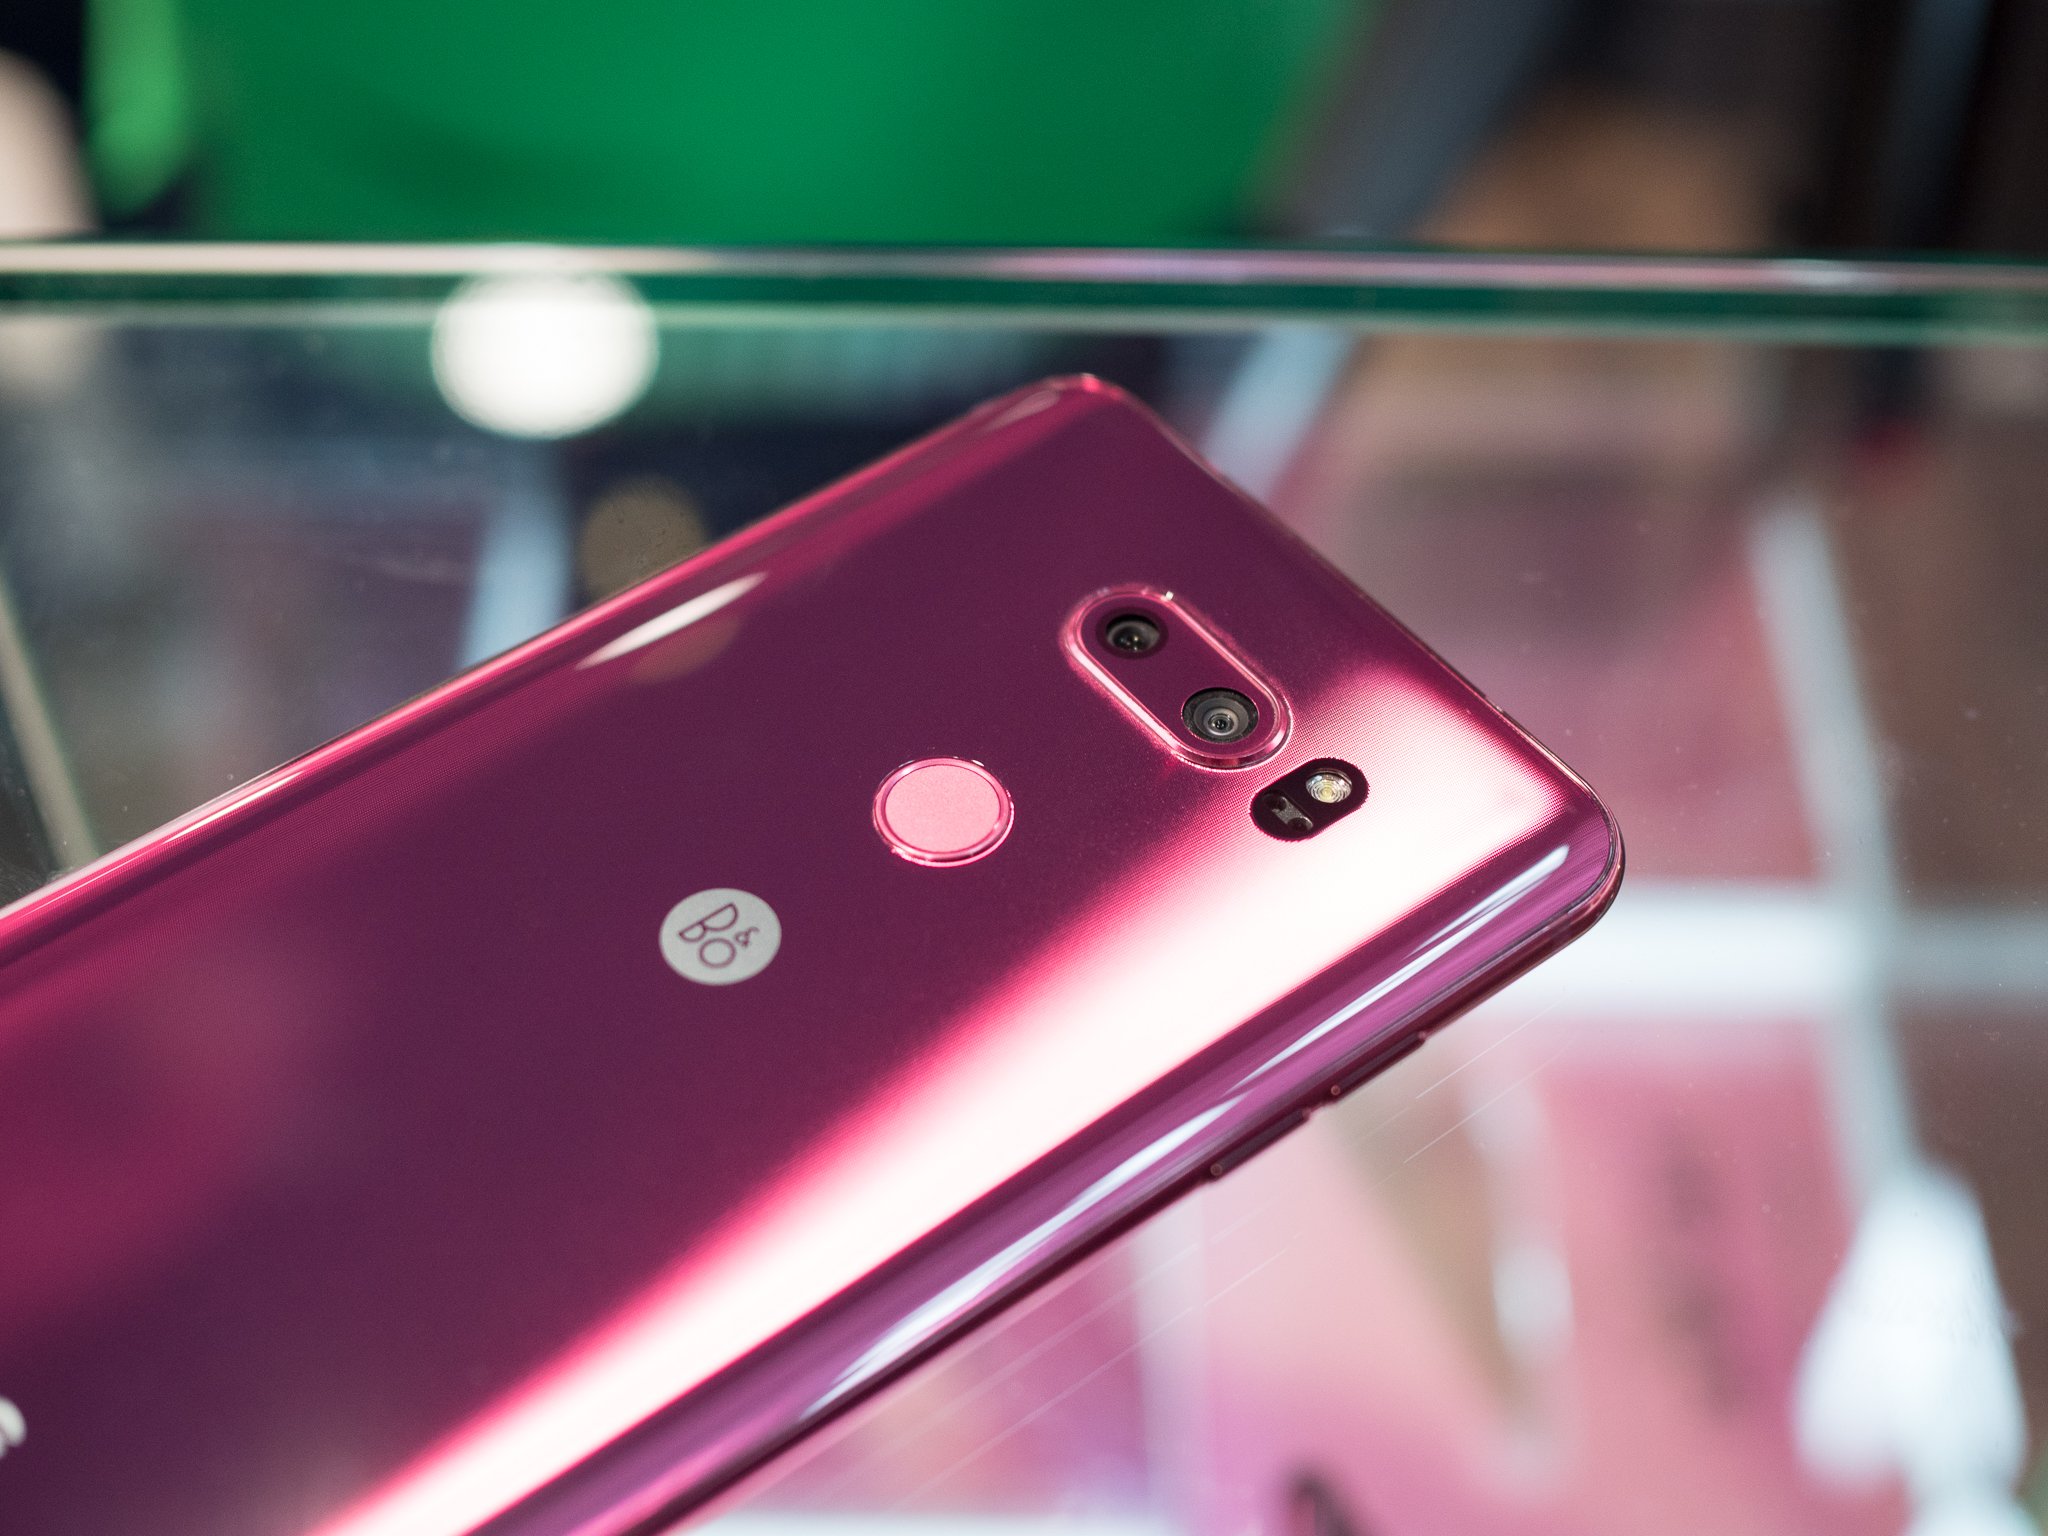 Yup The Lg V30 Is Beautiful In Its New Raspberry Rose Color